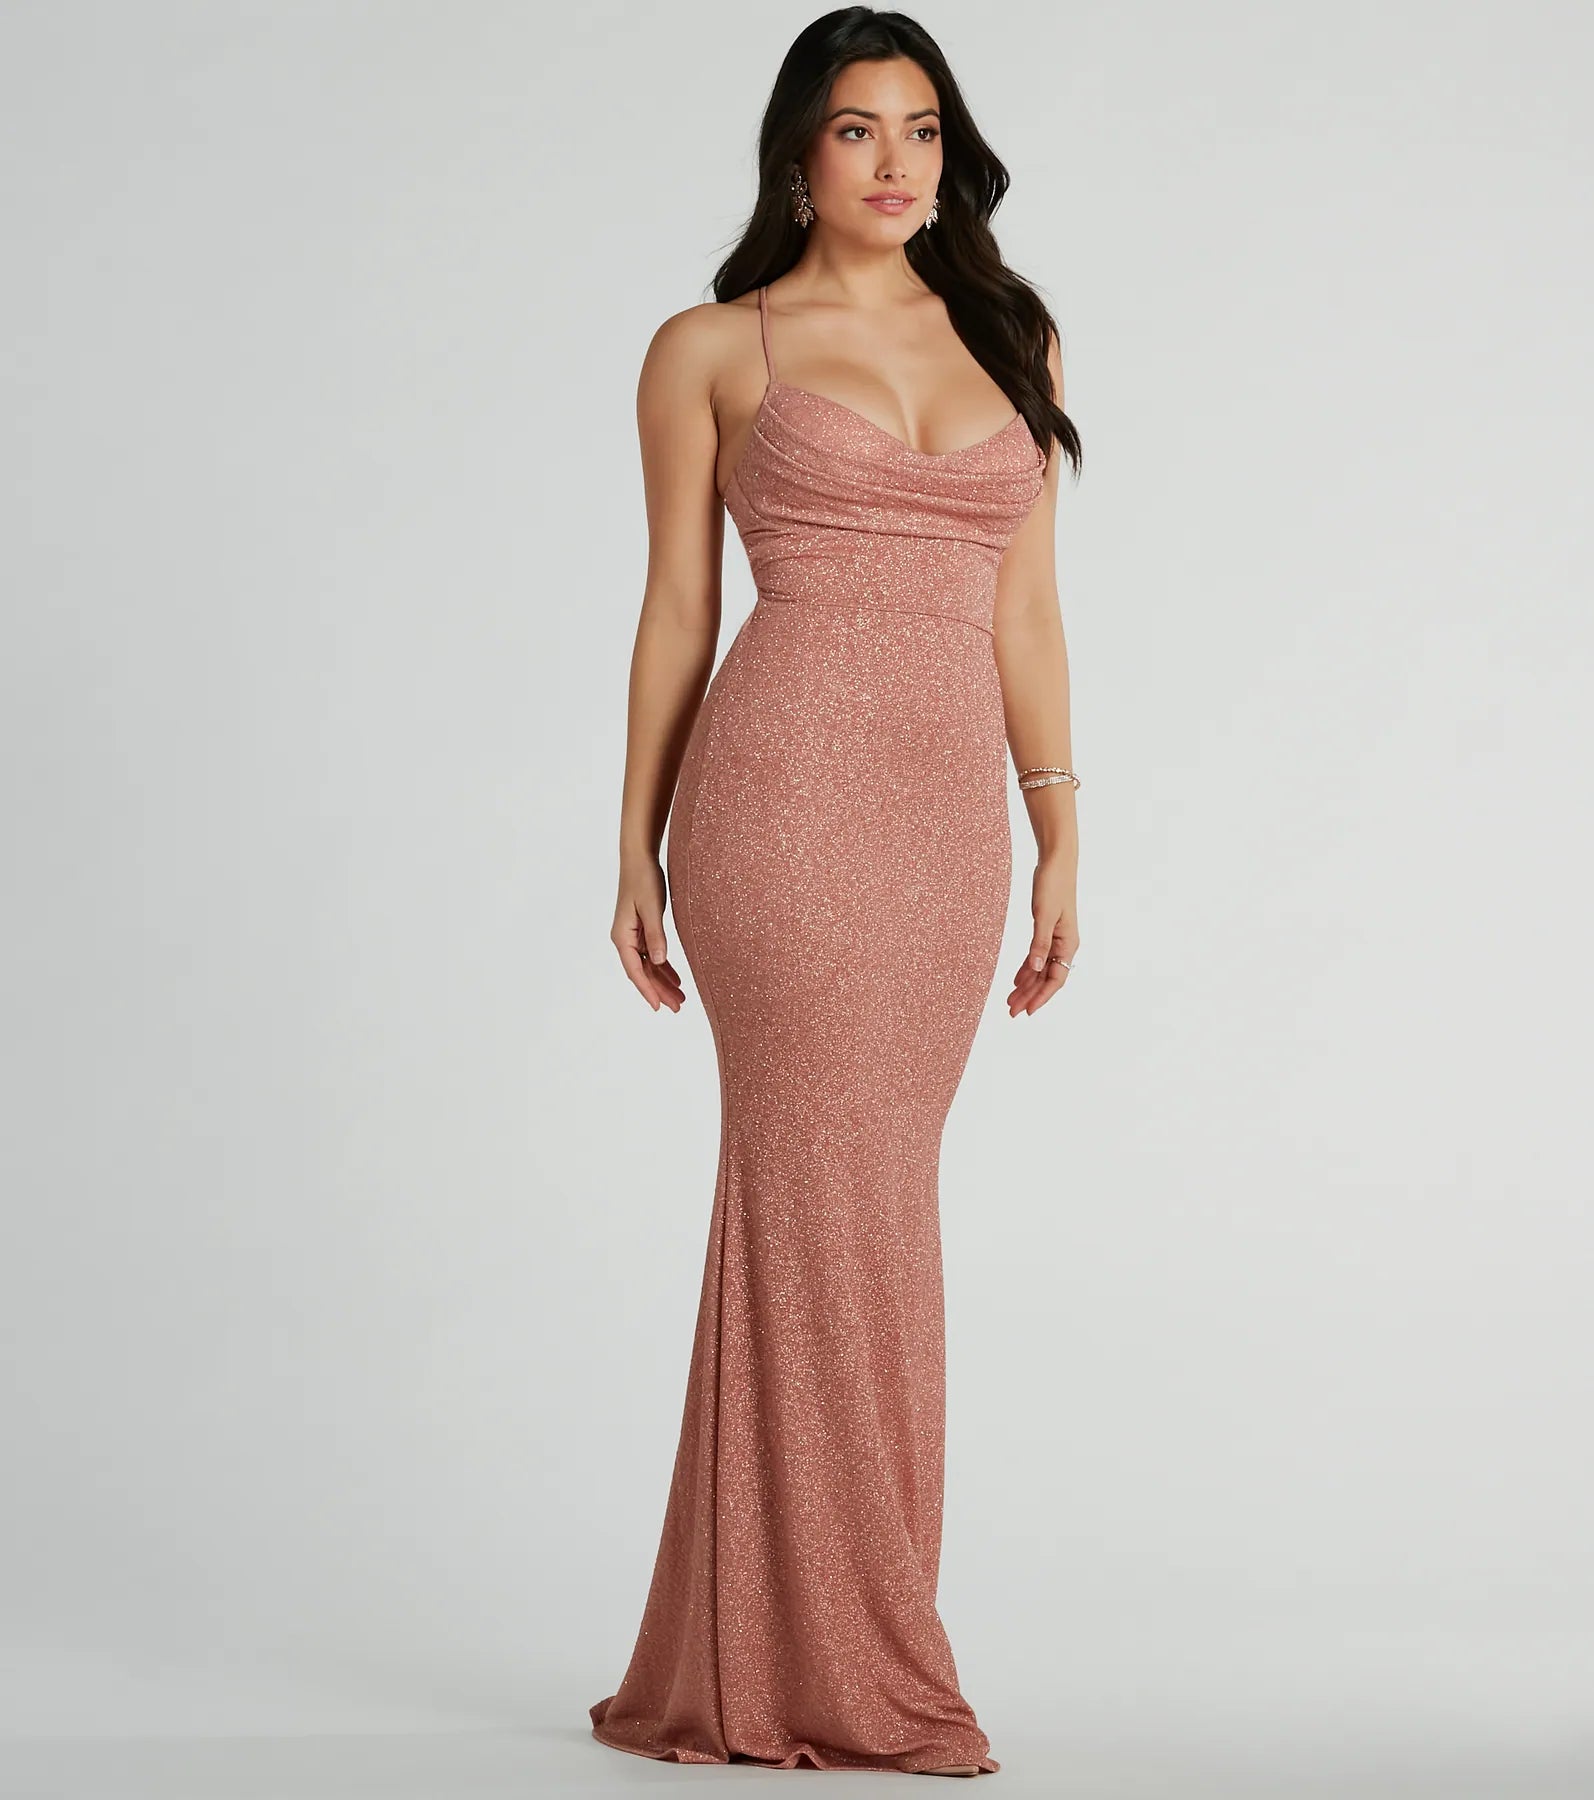 Sophisticated Spaghetti Strap Knit Floor Length Cowl Neck Glittering Lace-Up Stretchy Mermaid Prom Dress/Party Dress